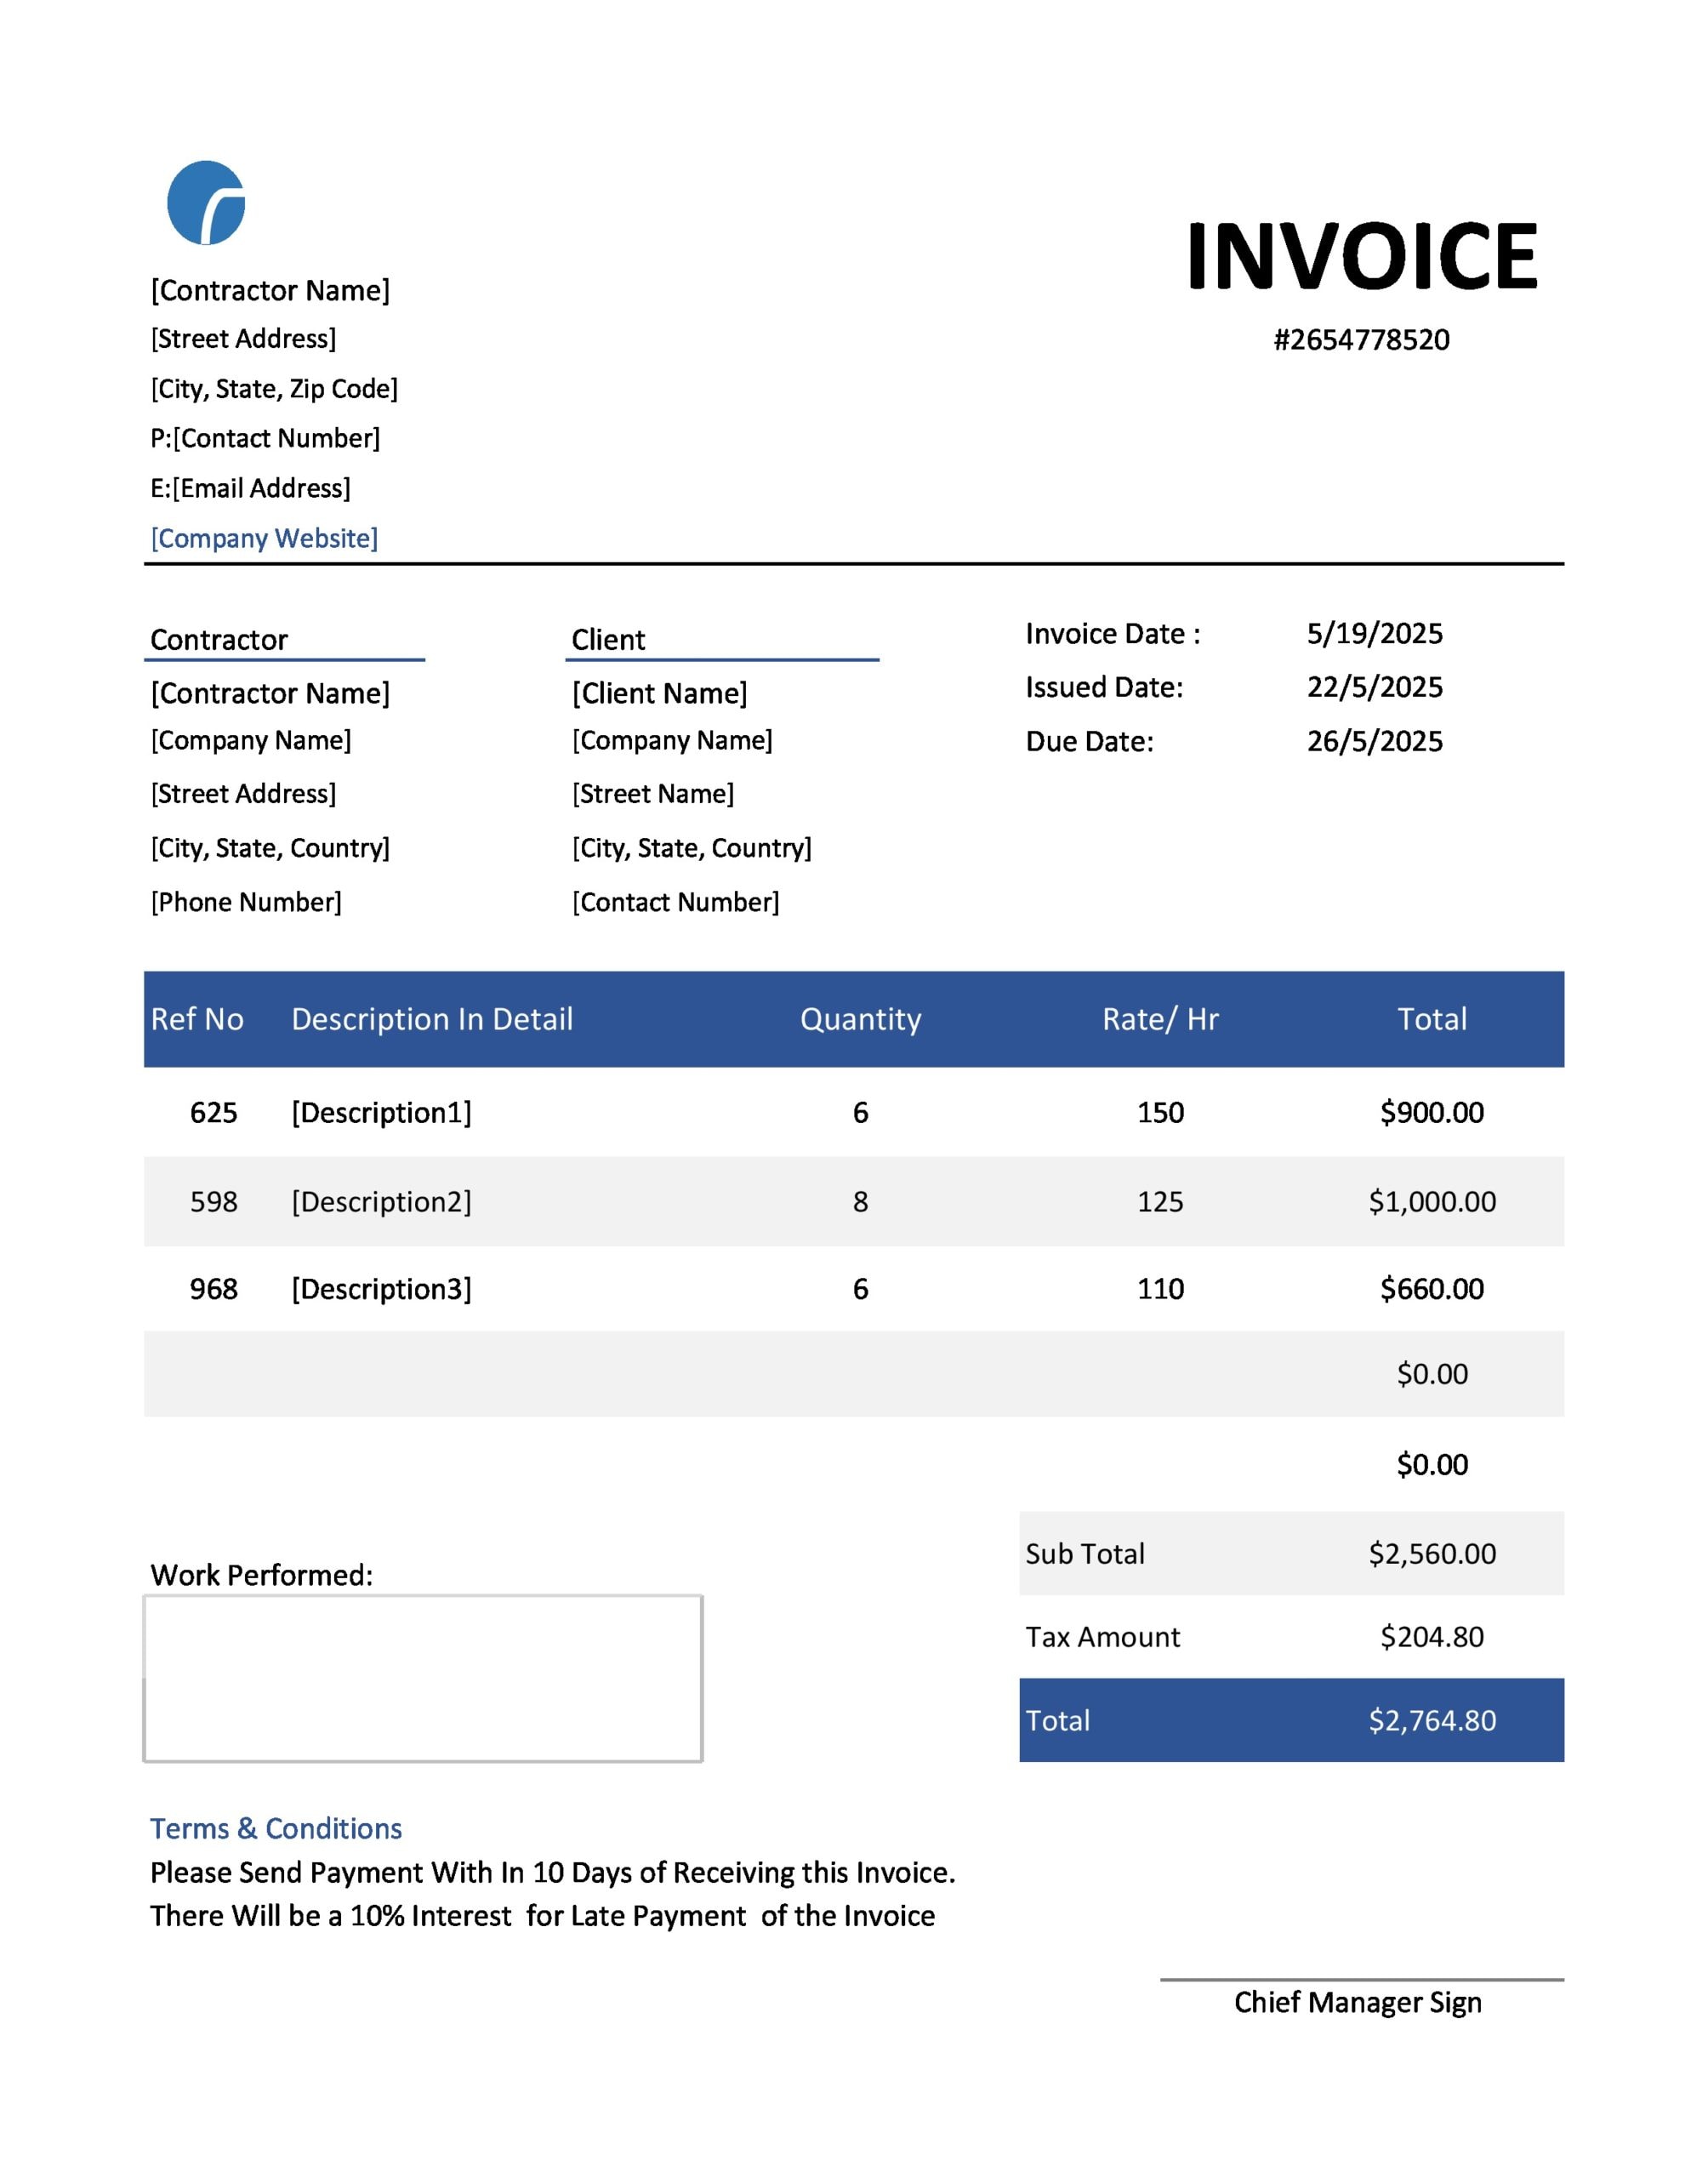 self employed excel invoice template